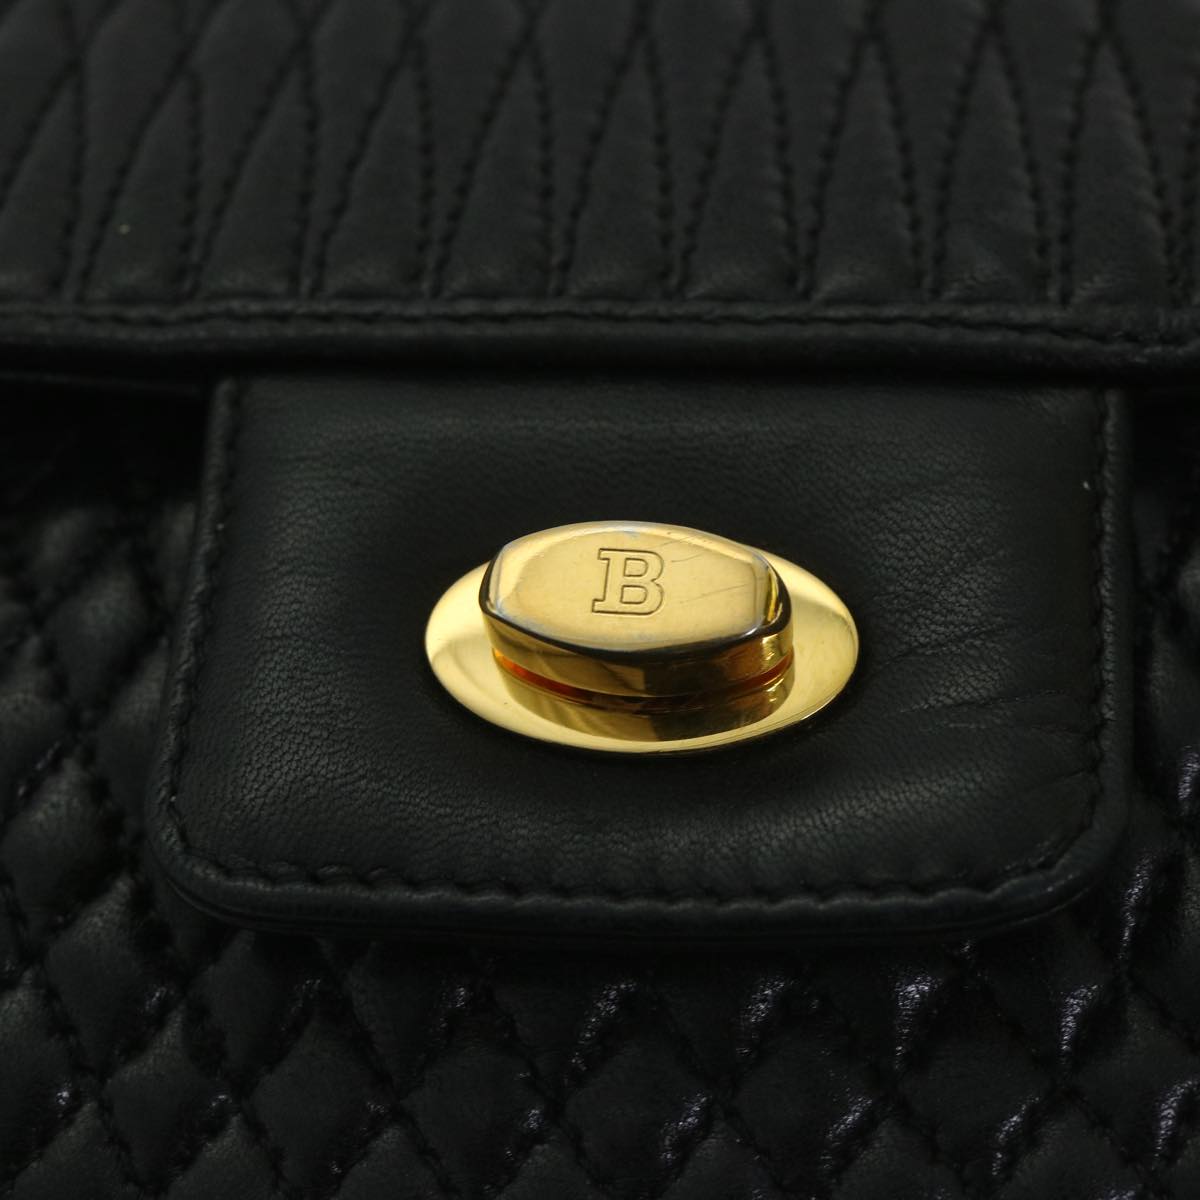 BALLY Chain Quilted Shoulder Bag Leather Black Auth 57285